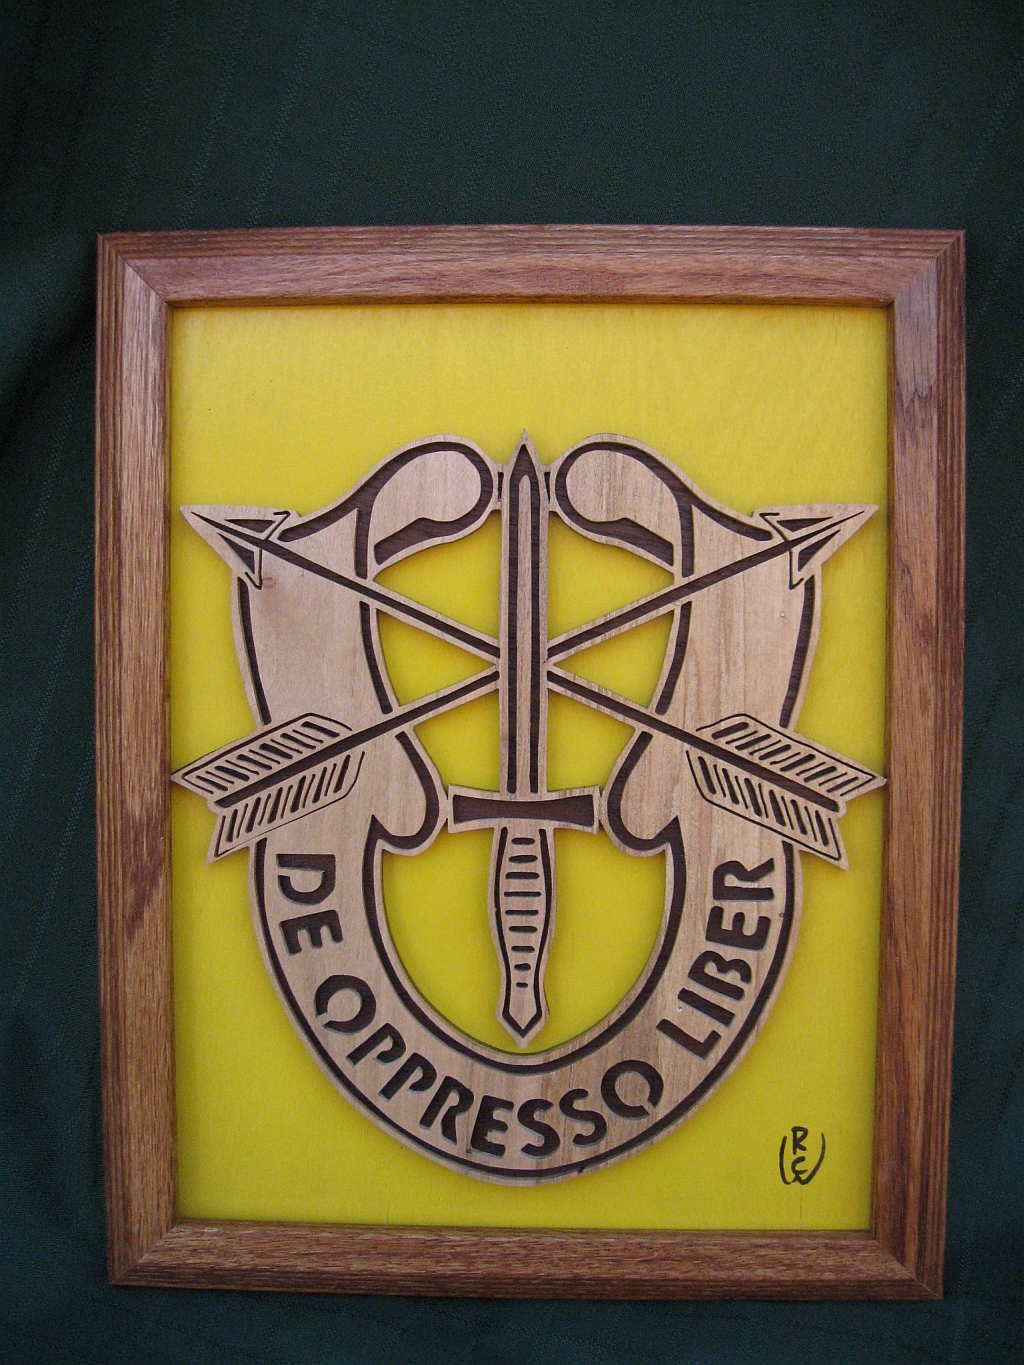 special forces crest